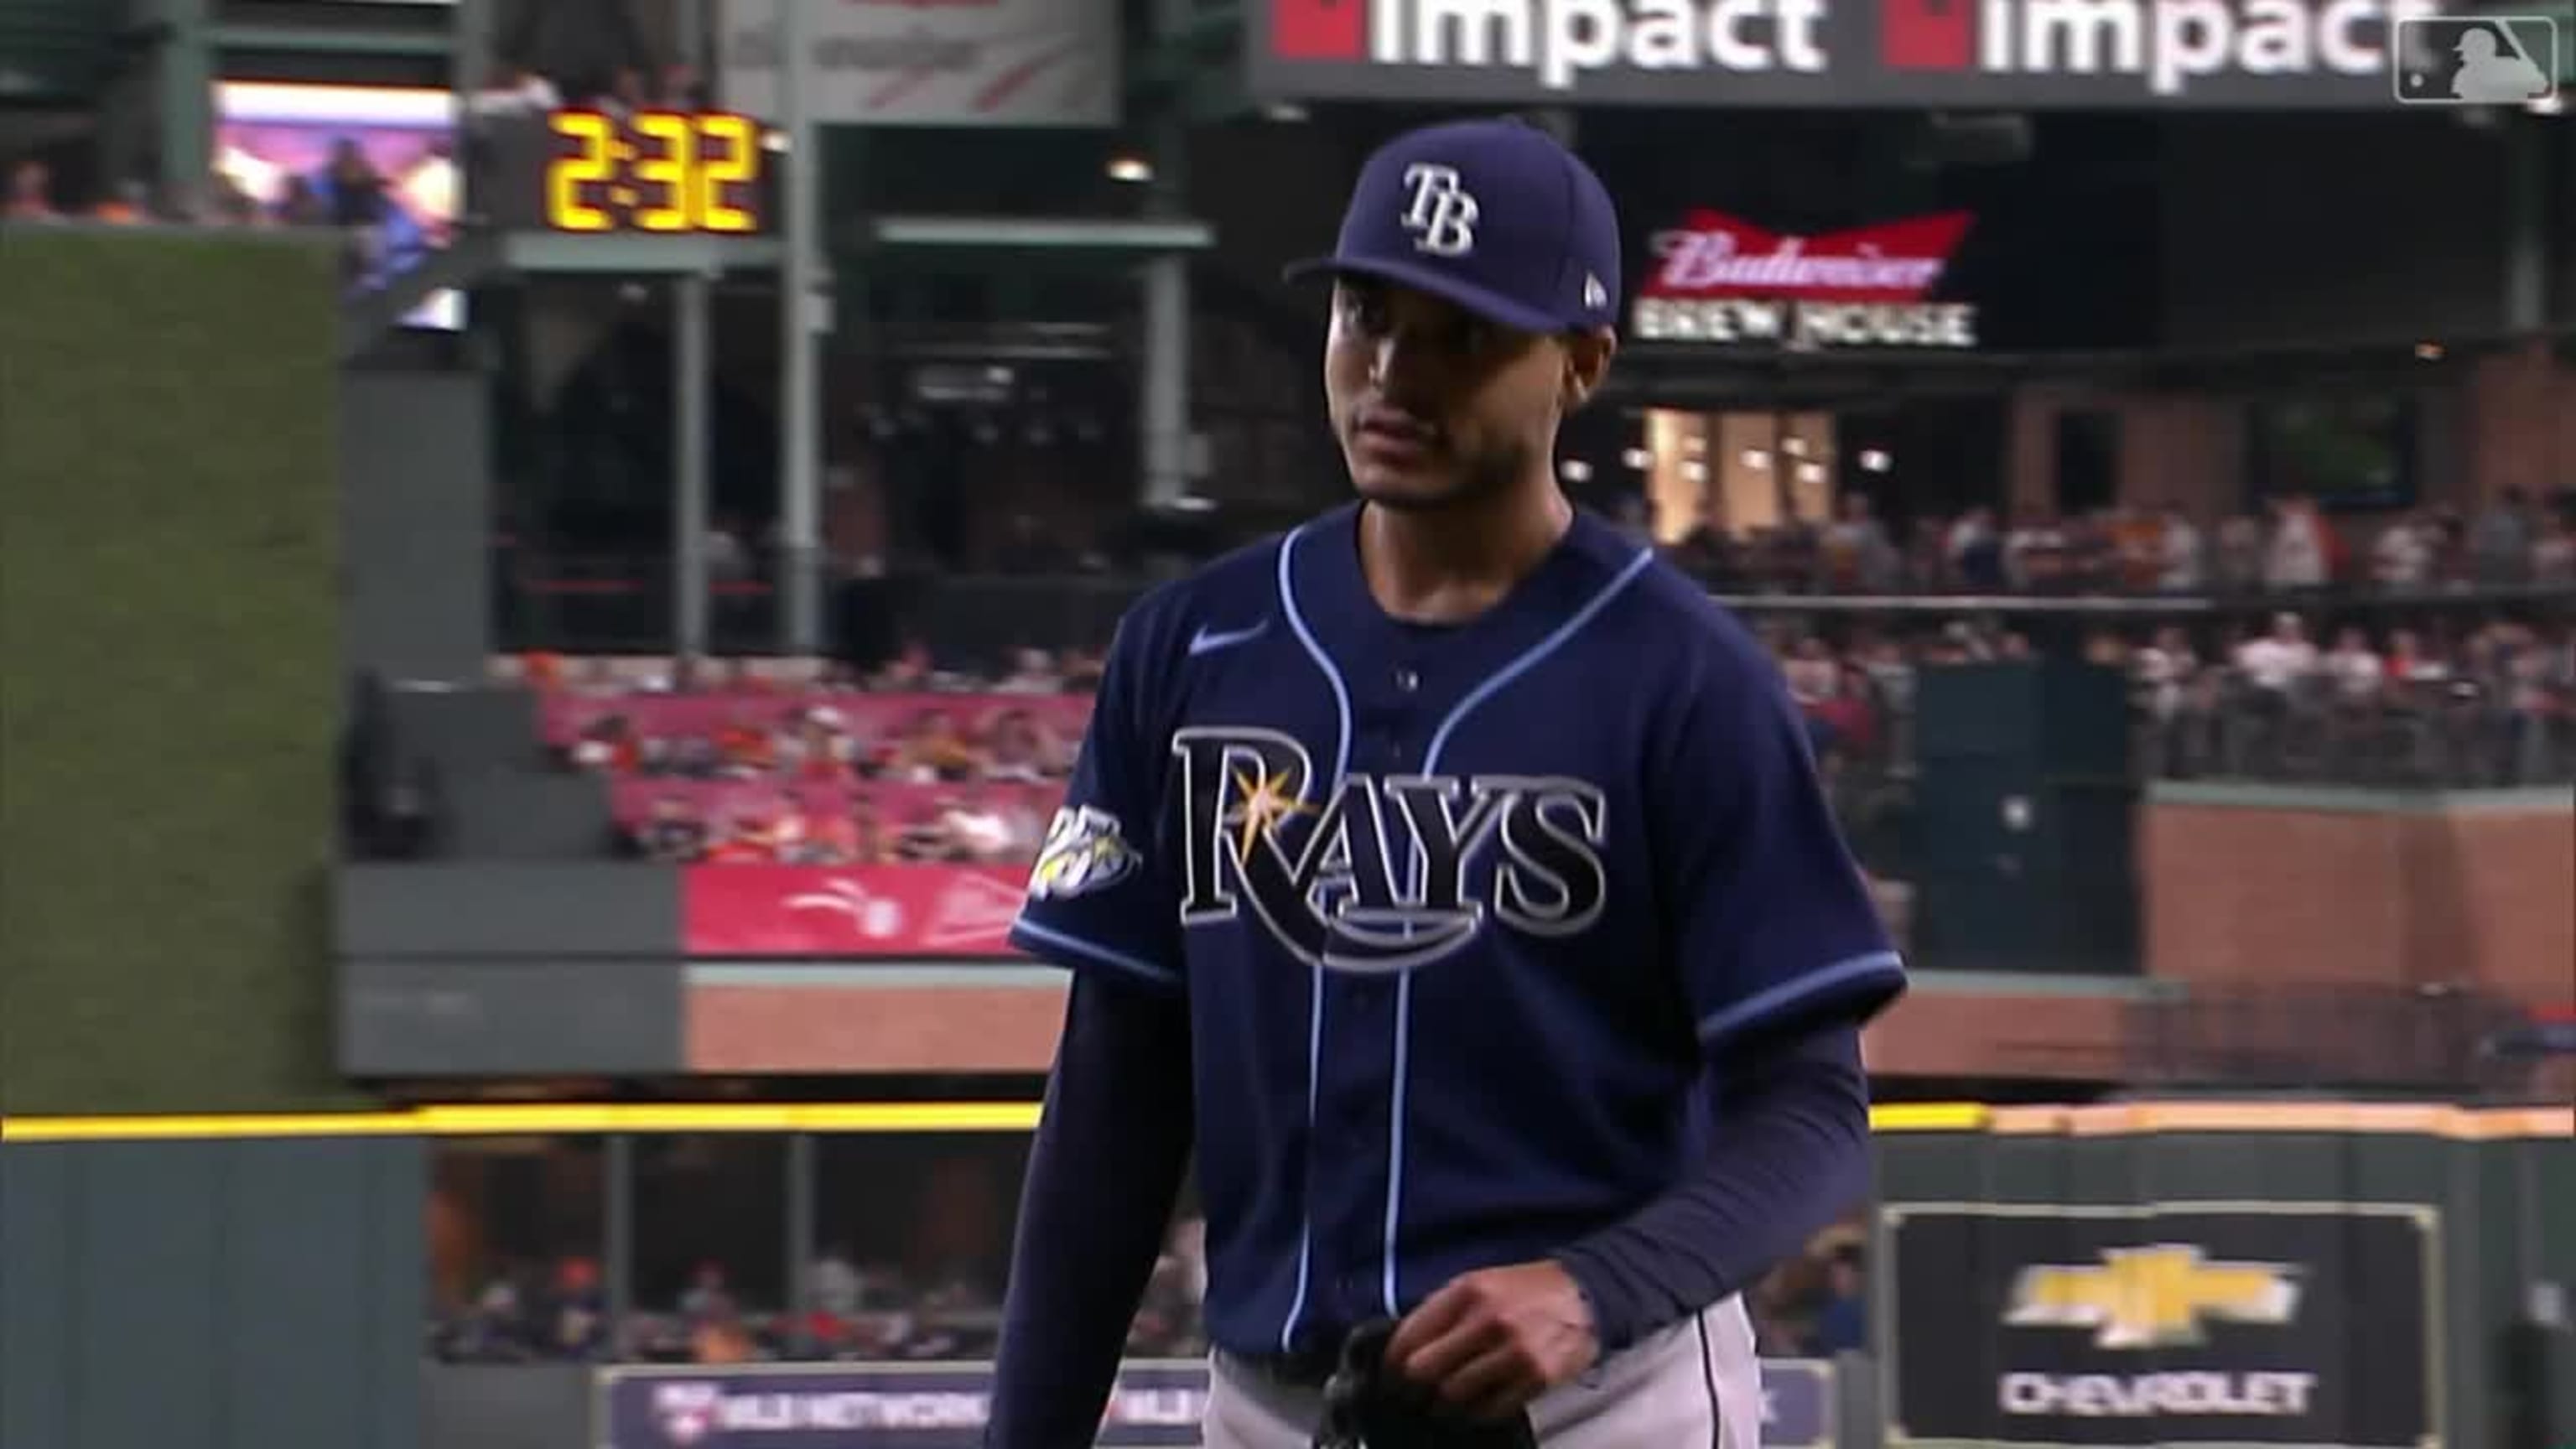 Rays beat Rangers at their own game, sending message as Isaac Paredes  torches Texas